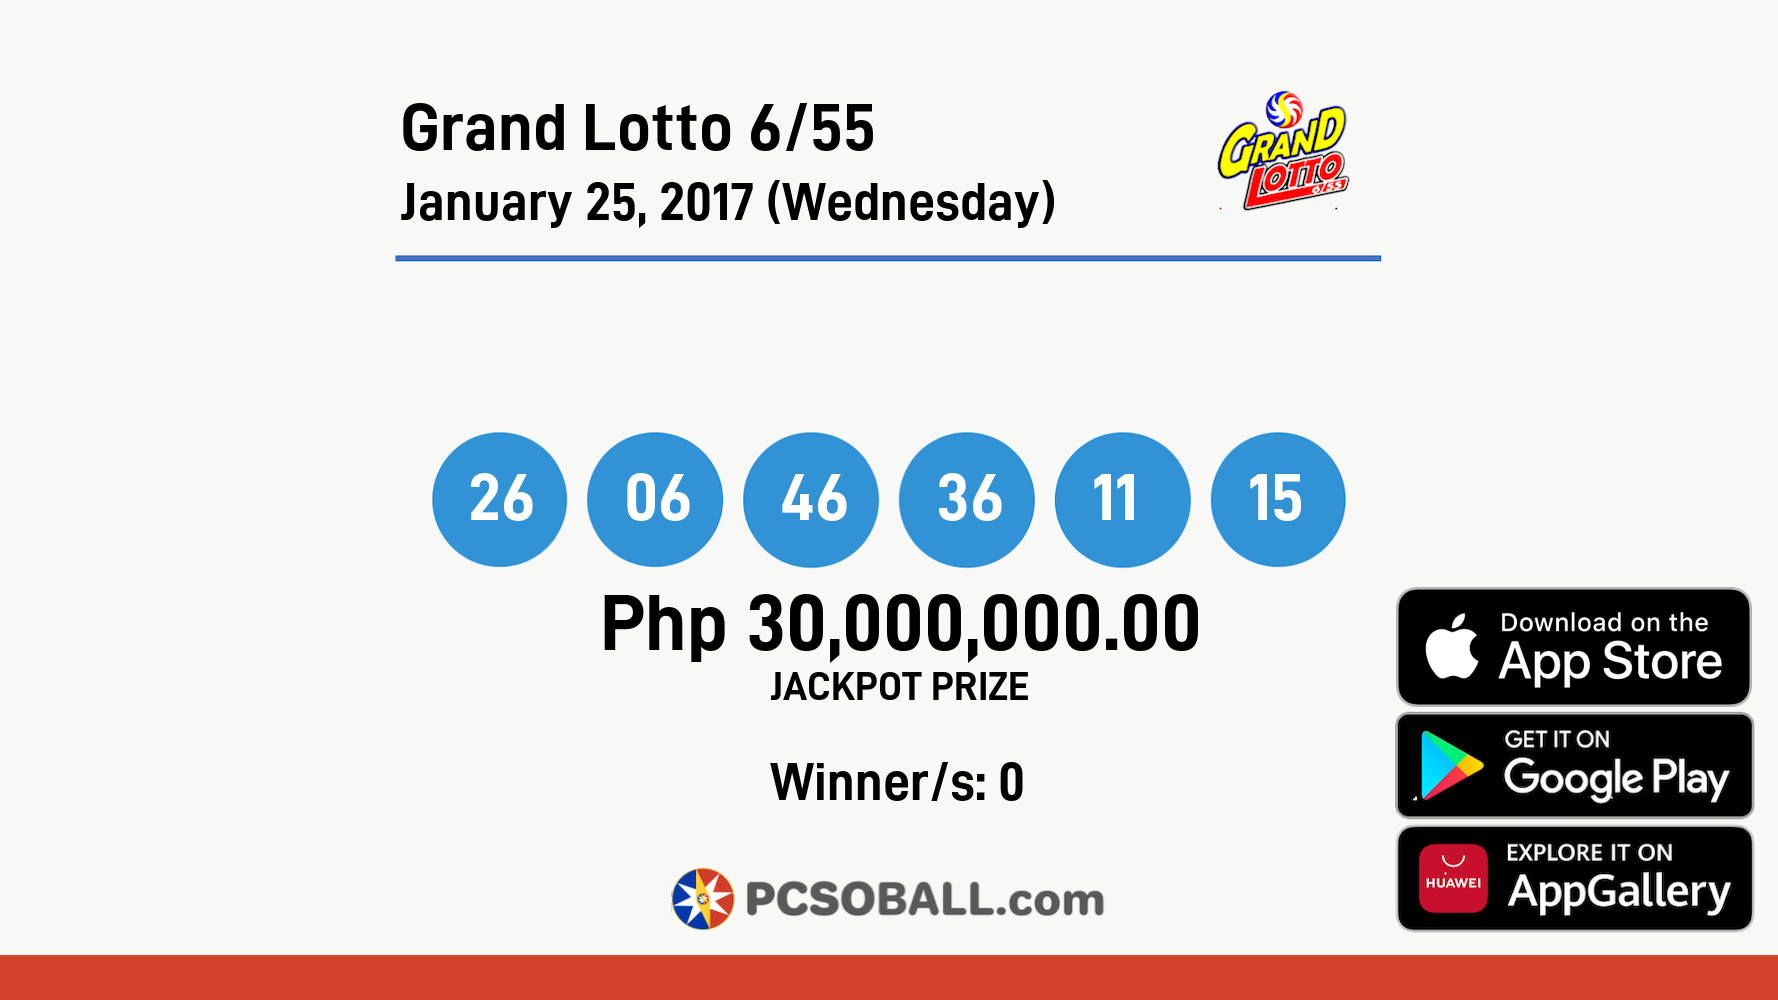 Grand Lotto 6/55 January 25, 2017 (Wednesday) Result